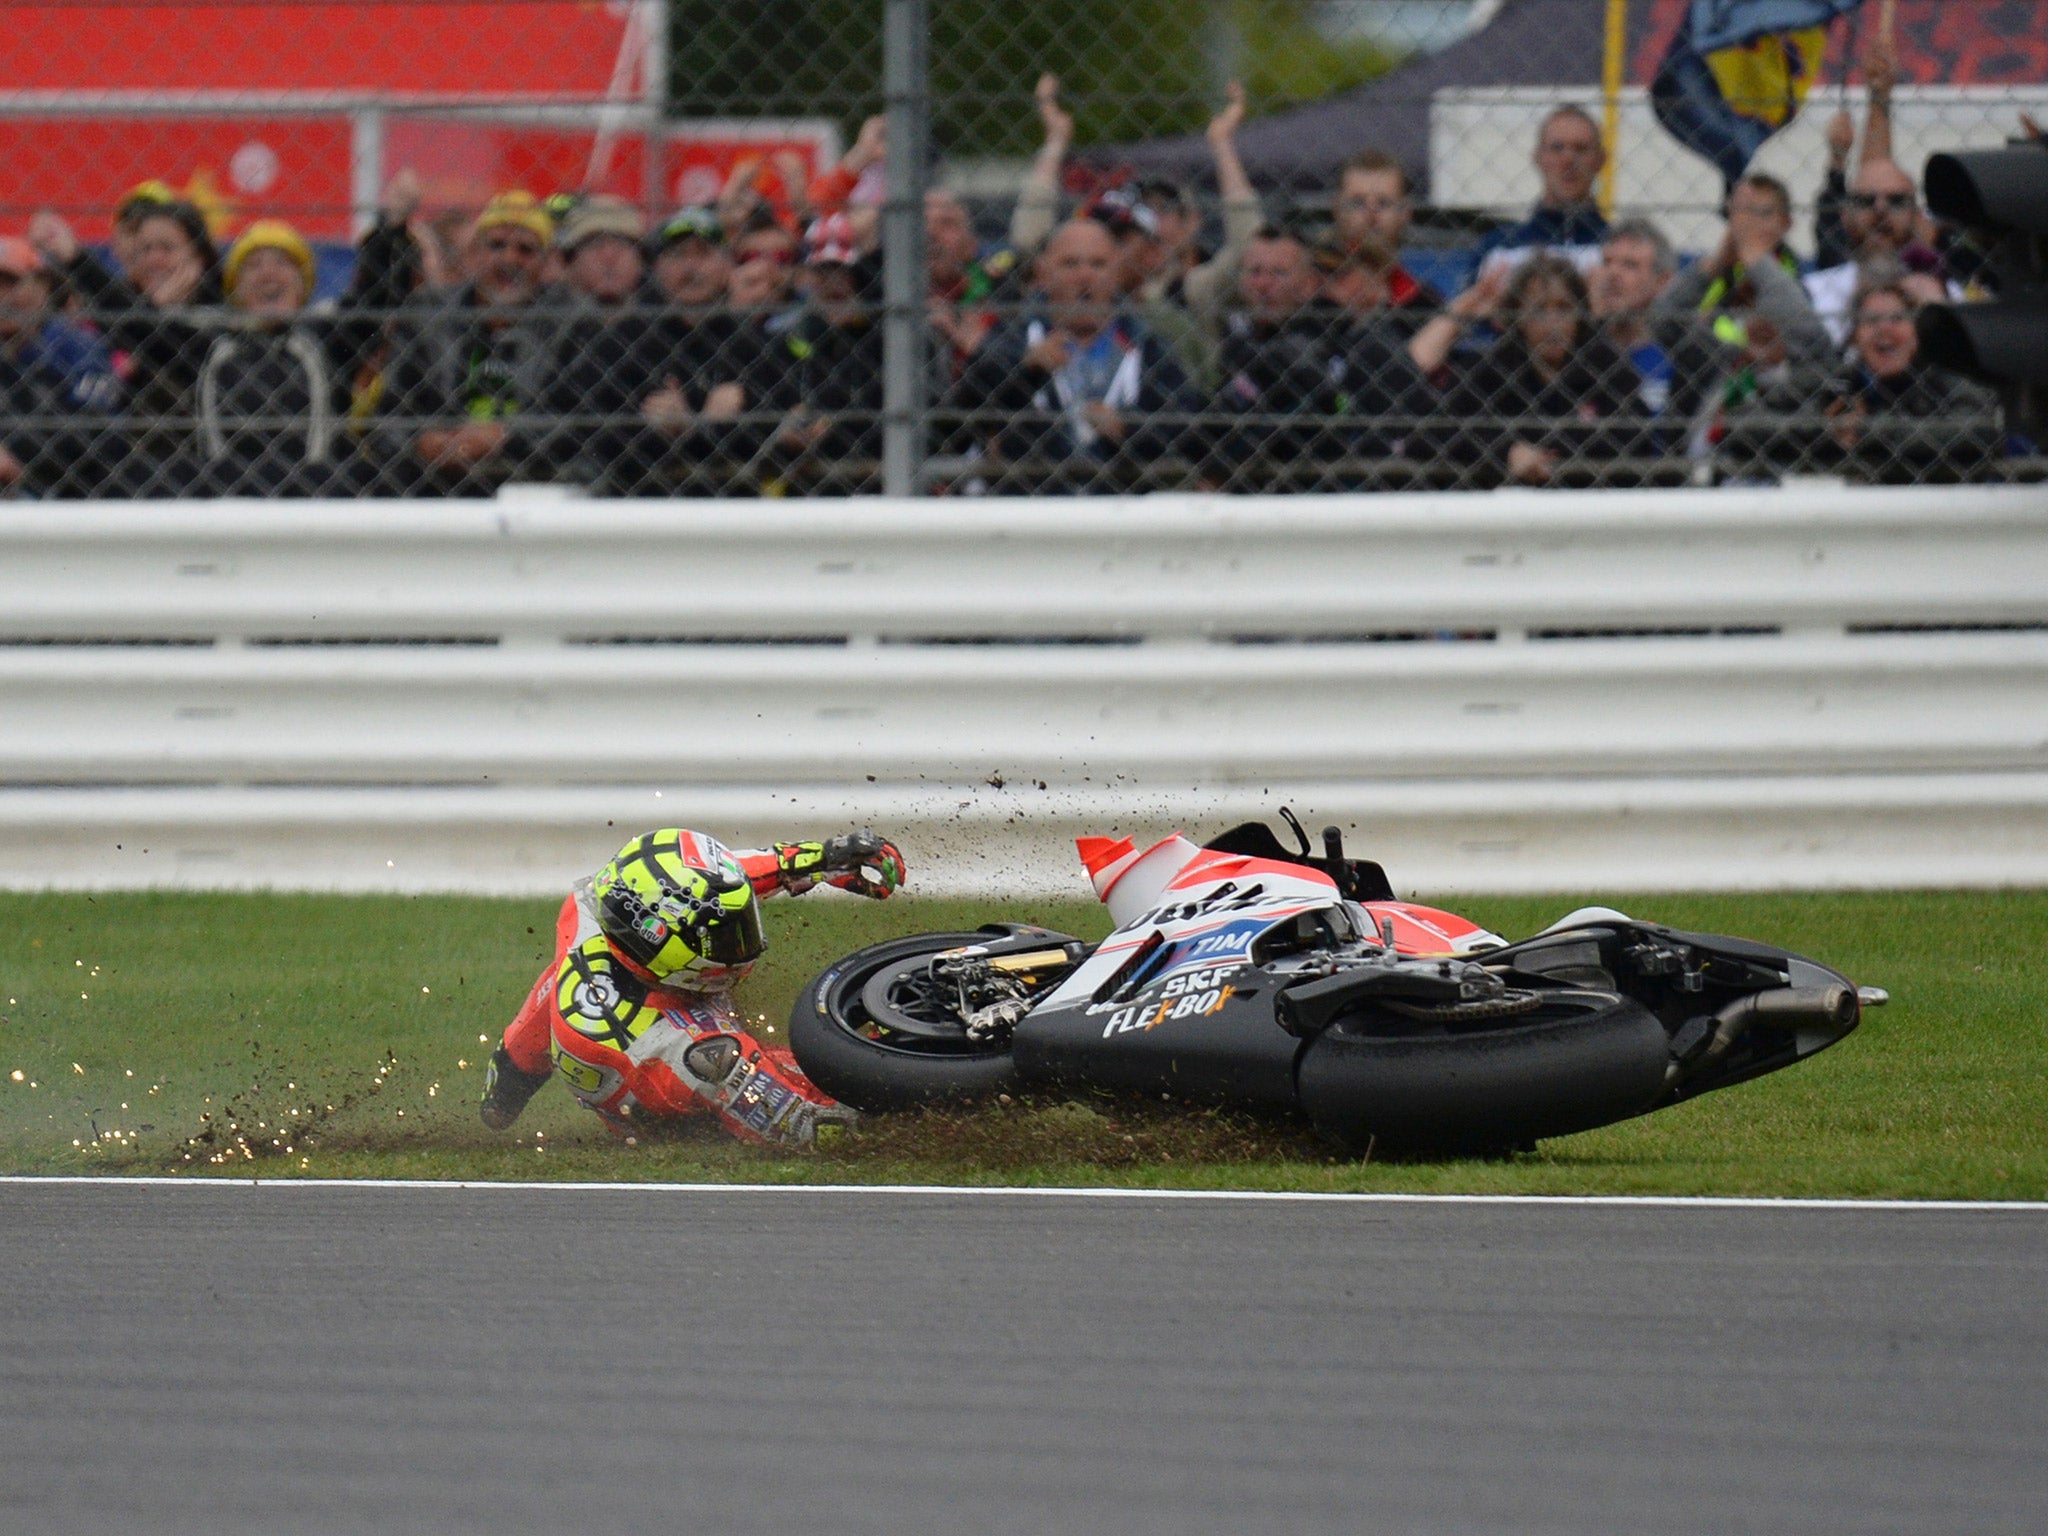 Andrea Iannone crashed out of second place